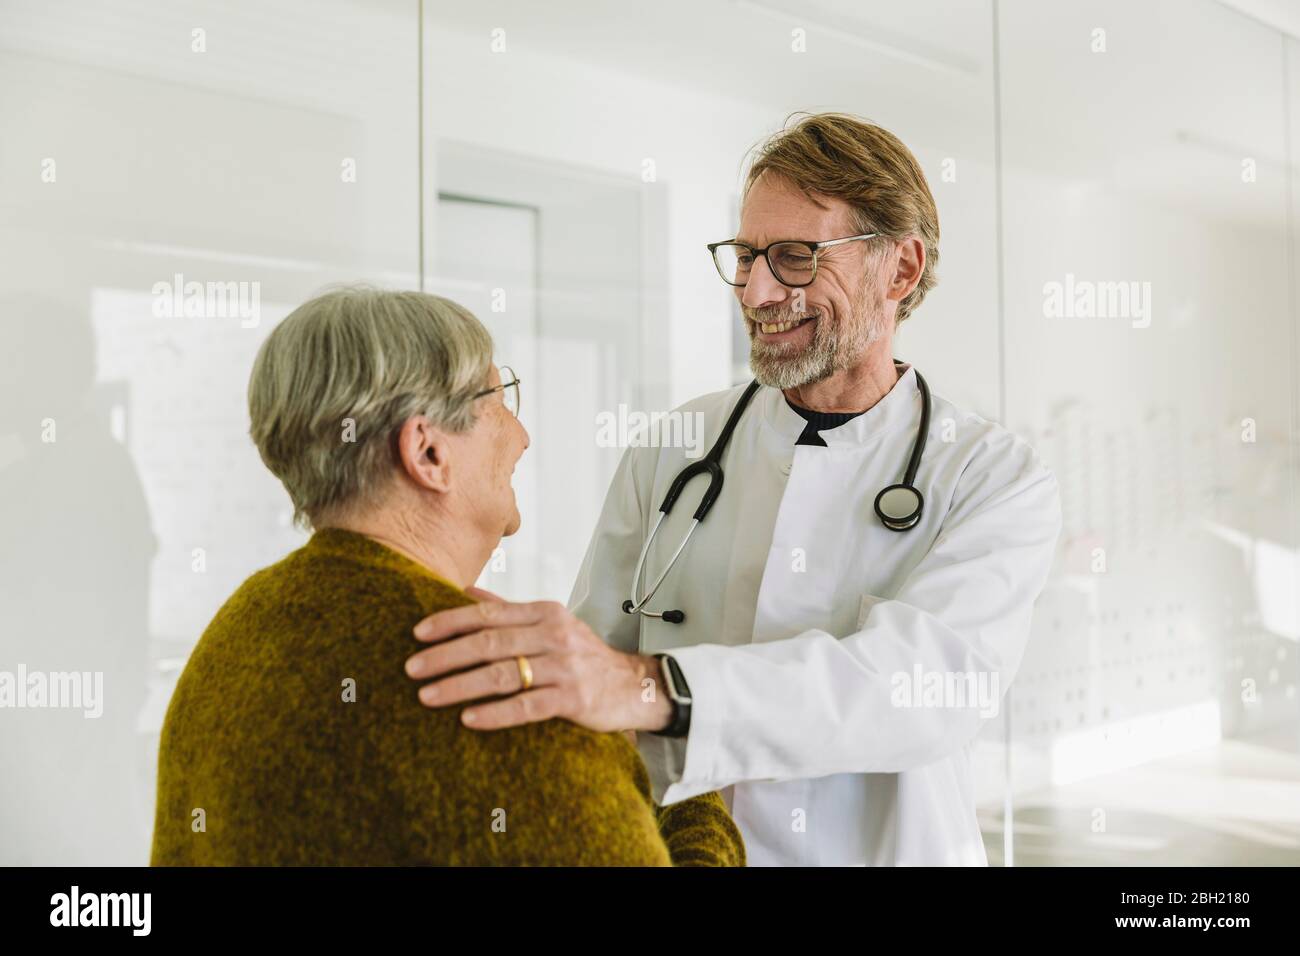 Smiling doctor and senior patient in medical practice Stock Photo